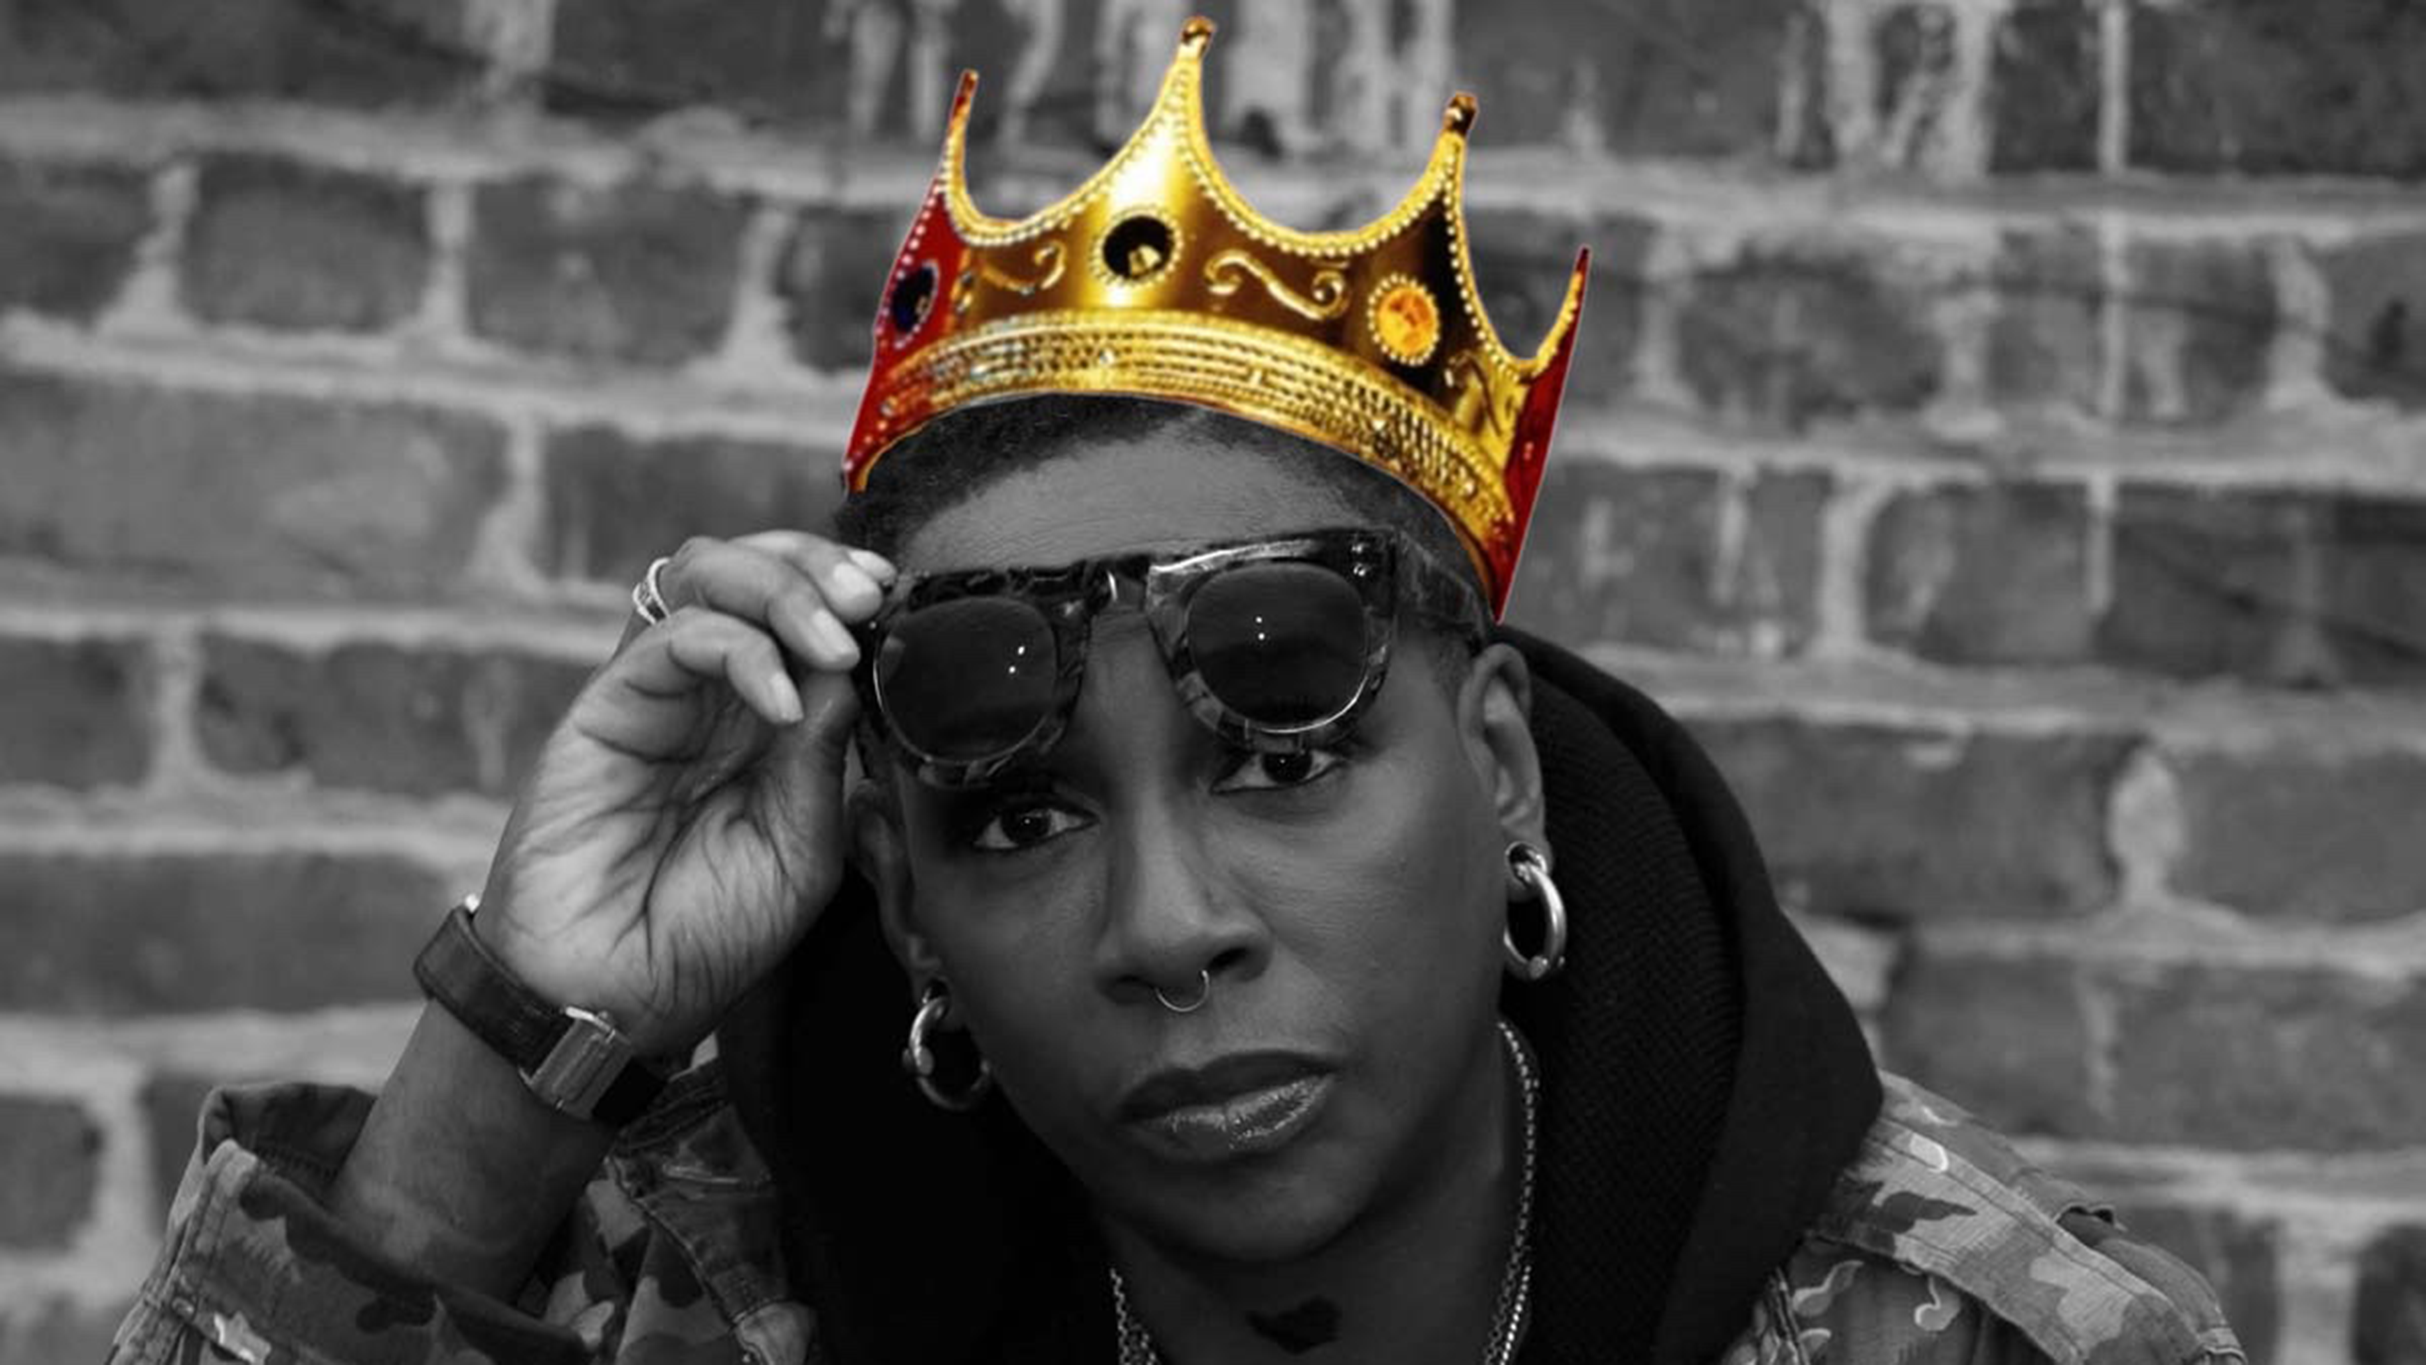 Gina Yashere presales in Los Angeles